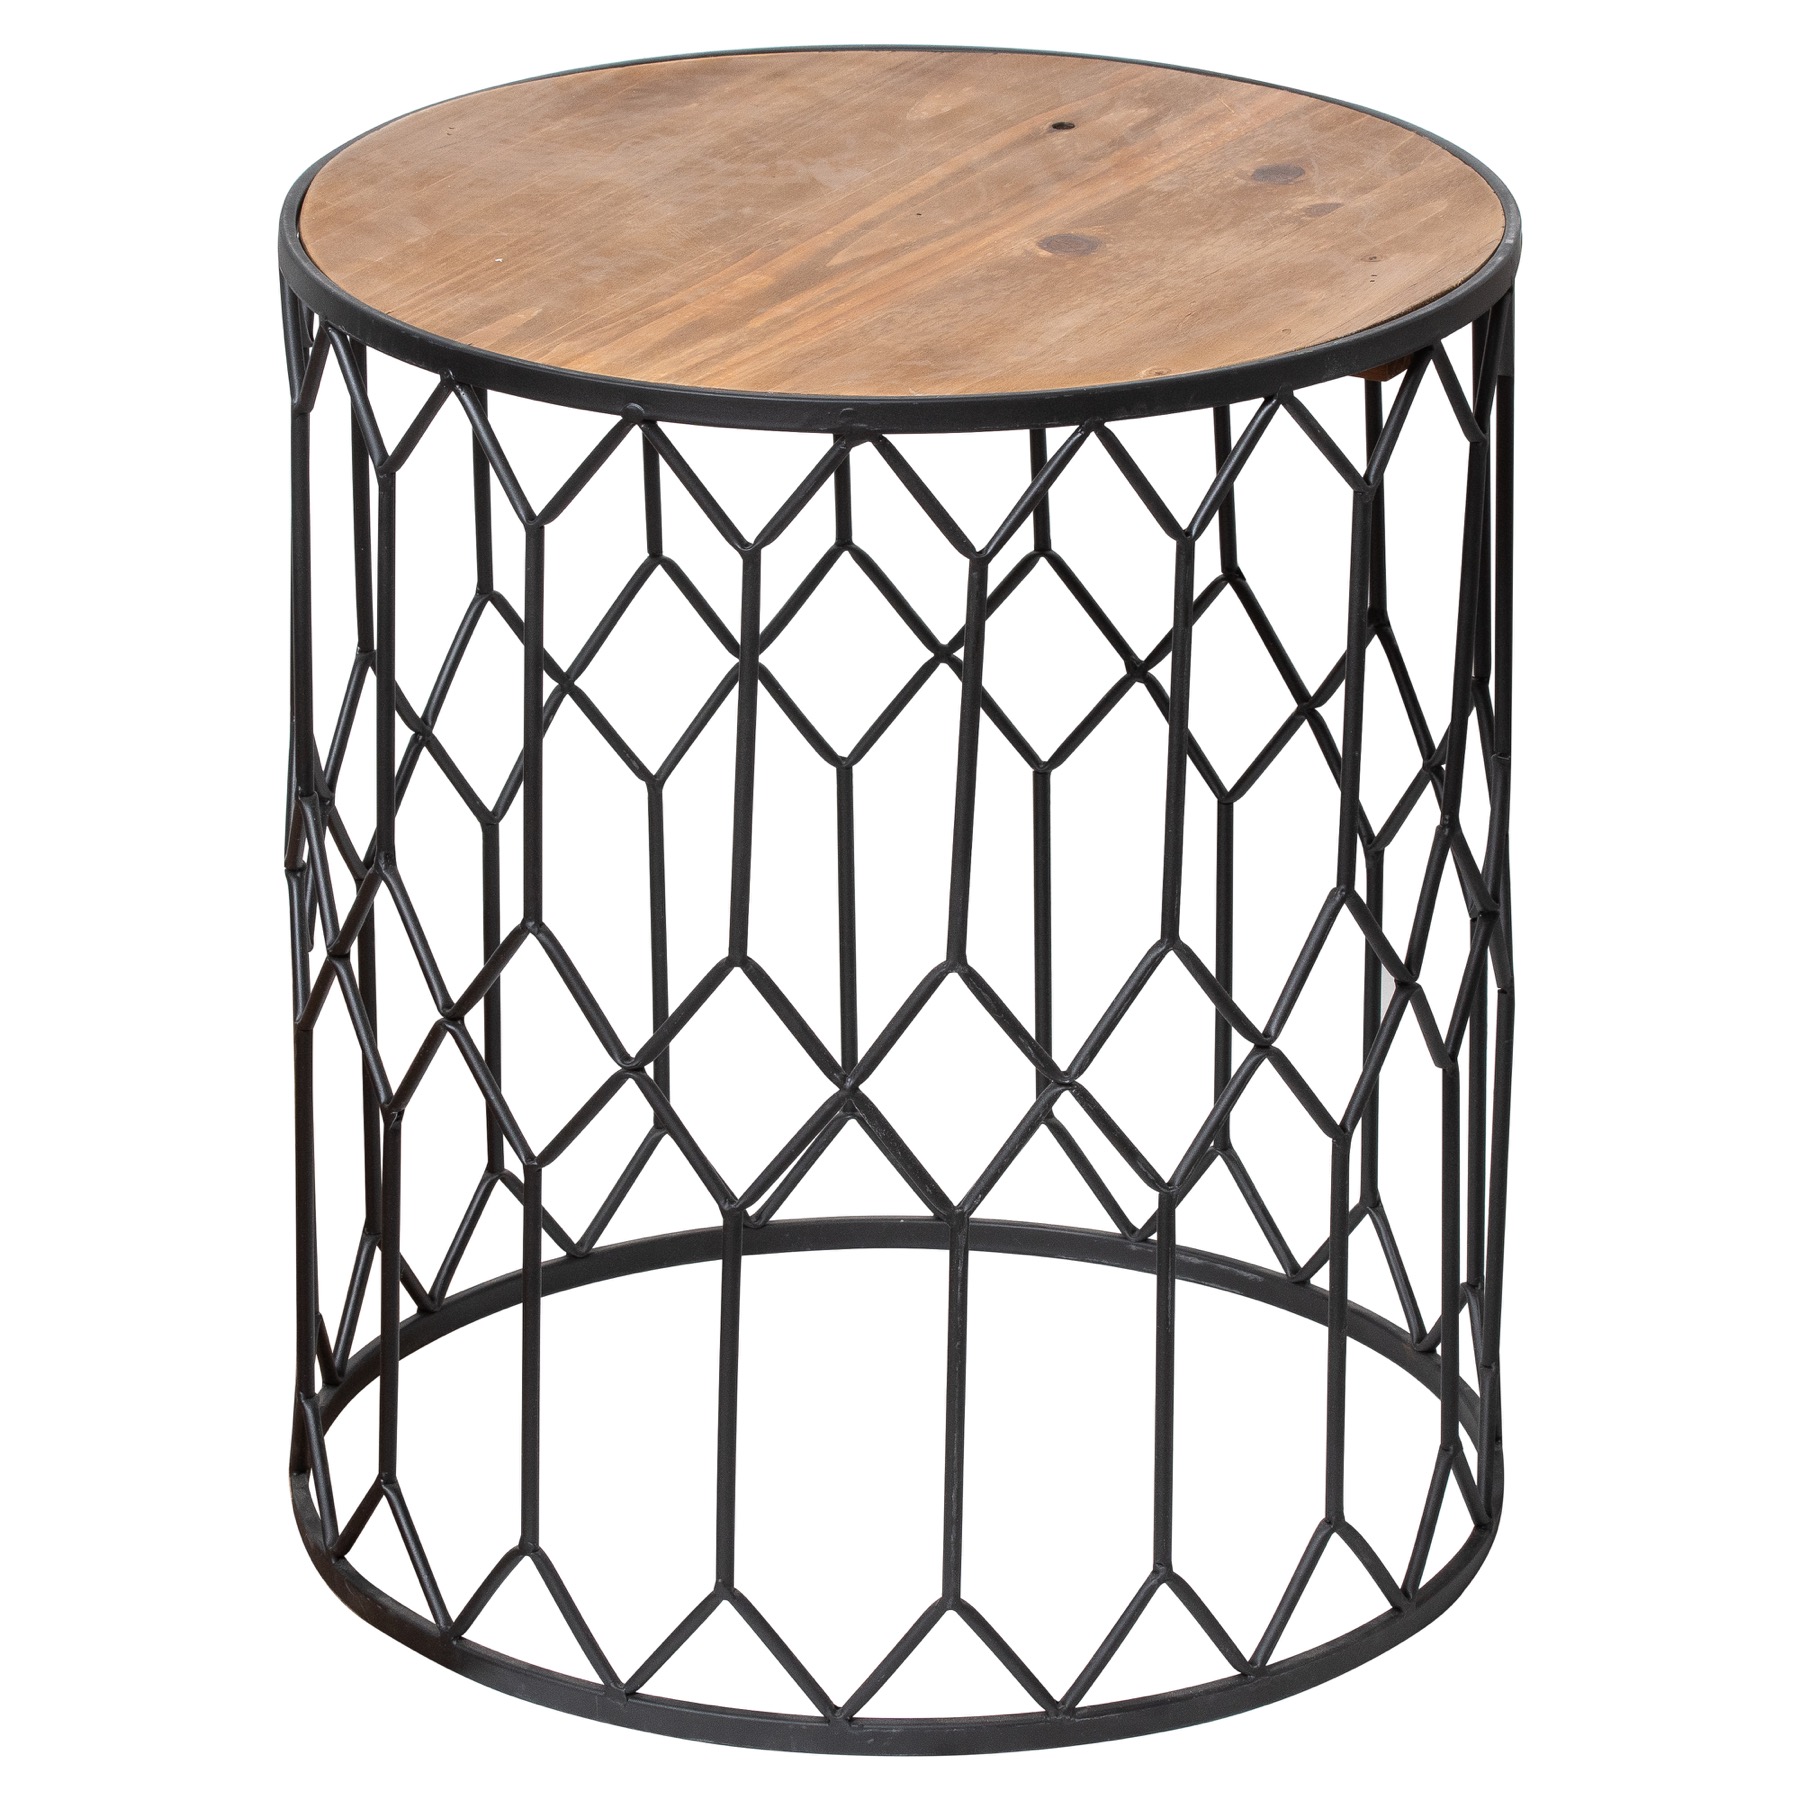 Set Of Three Honeycomb Side Tables - Image 2